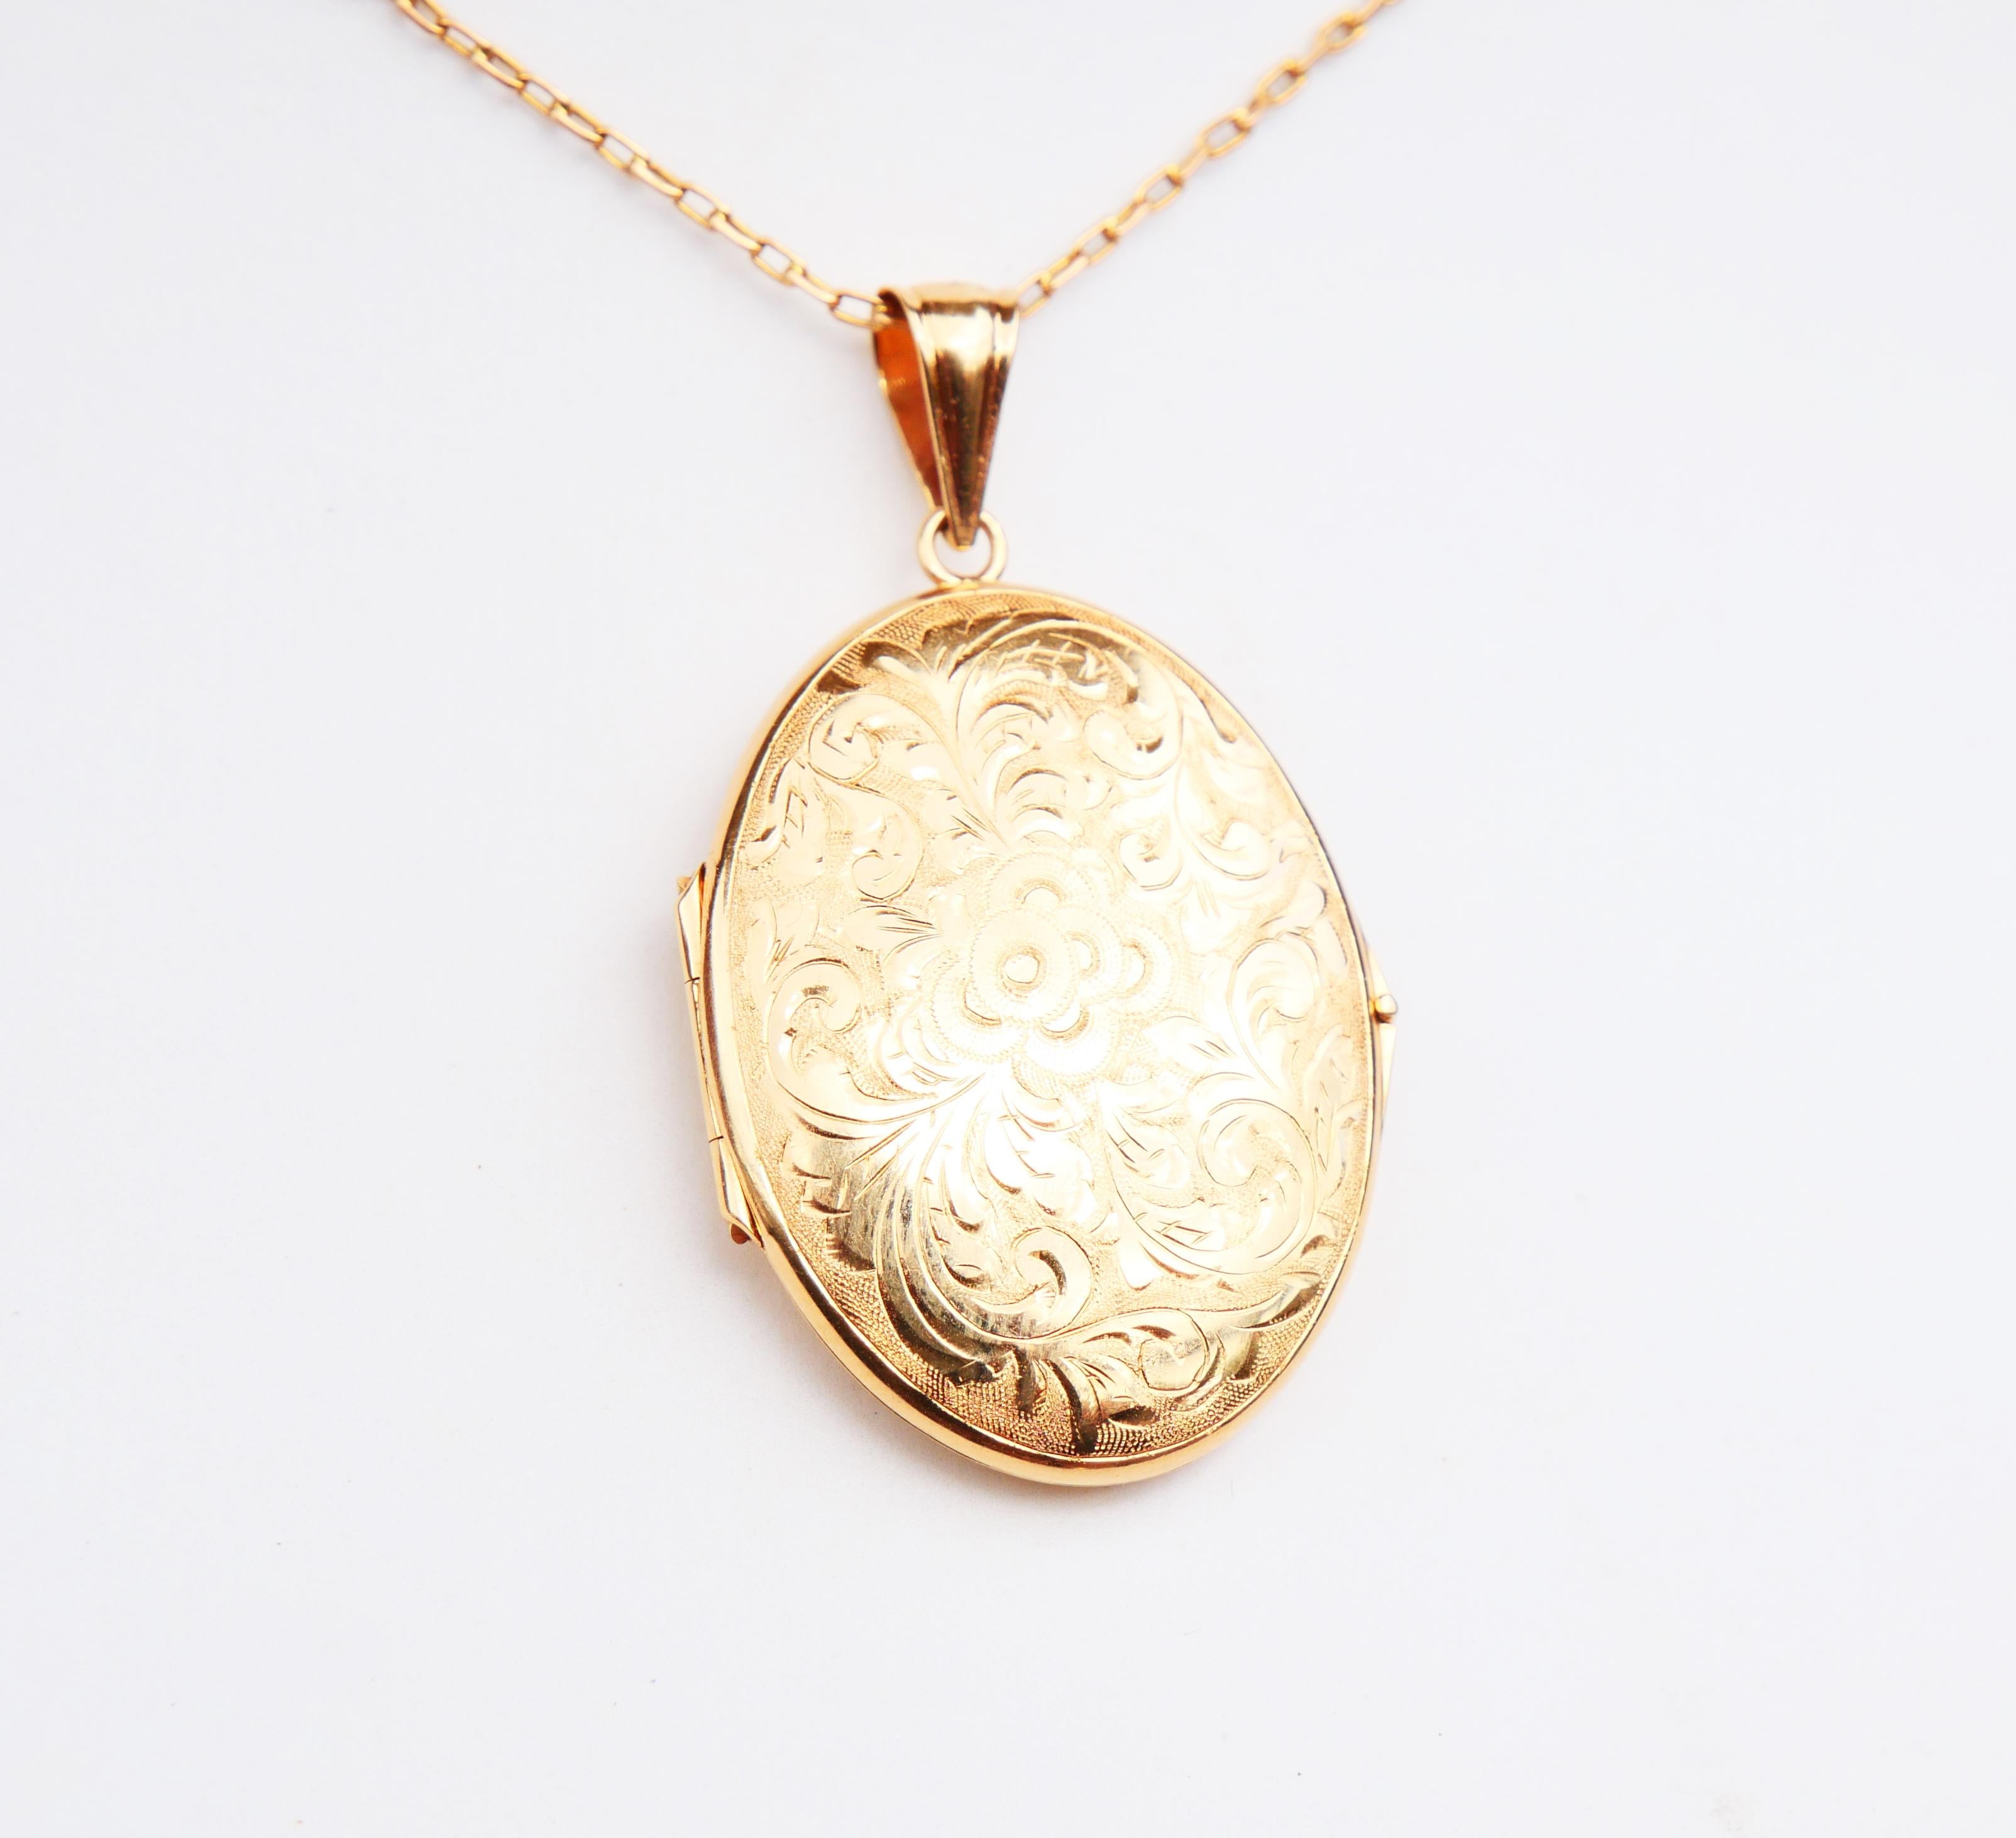 Antique oval Picture Locket Pendant solid 18K Yellow Gold / 6gr